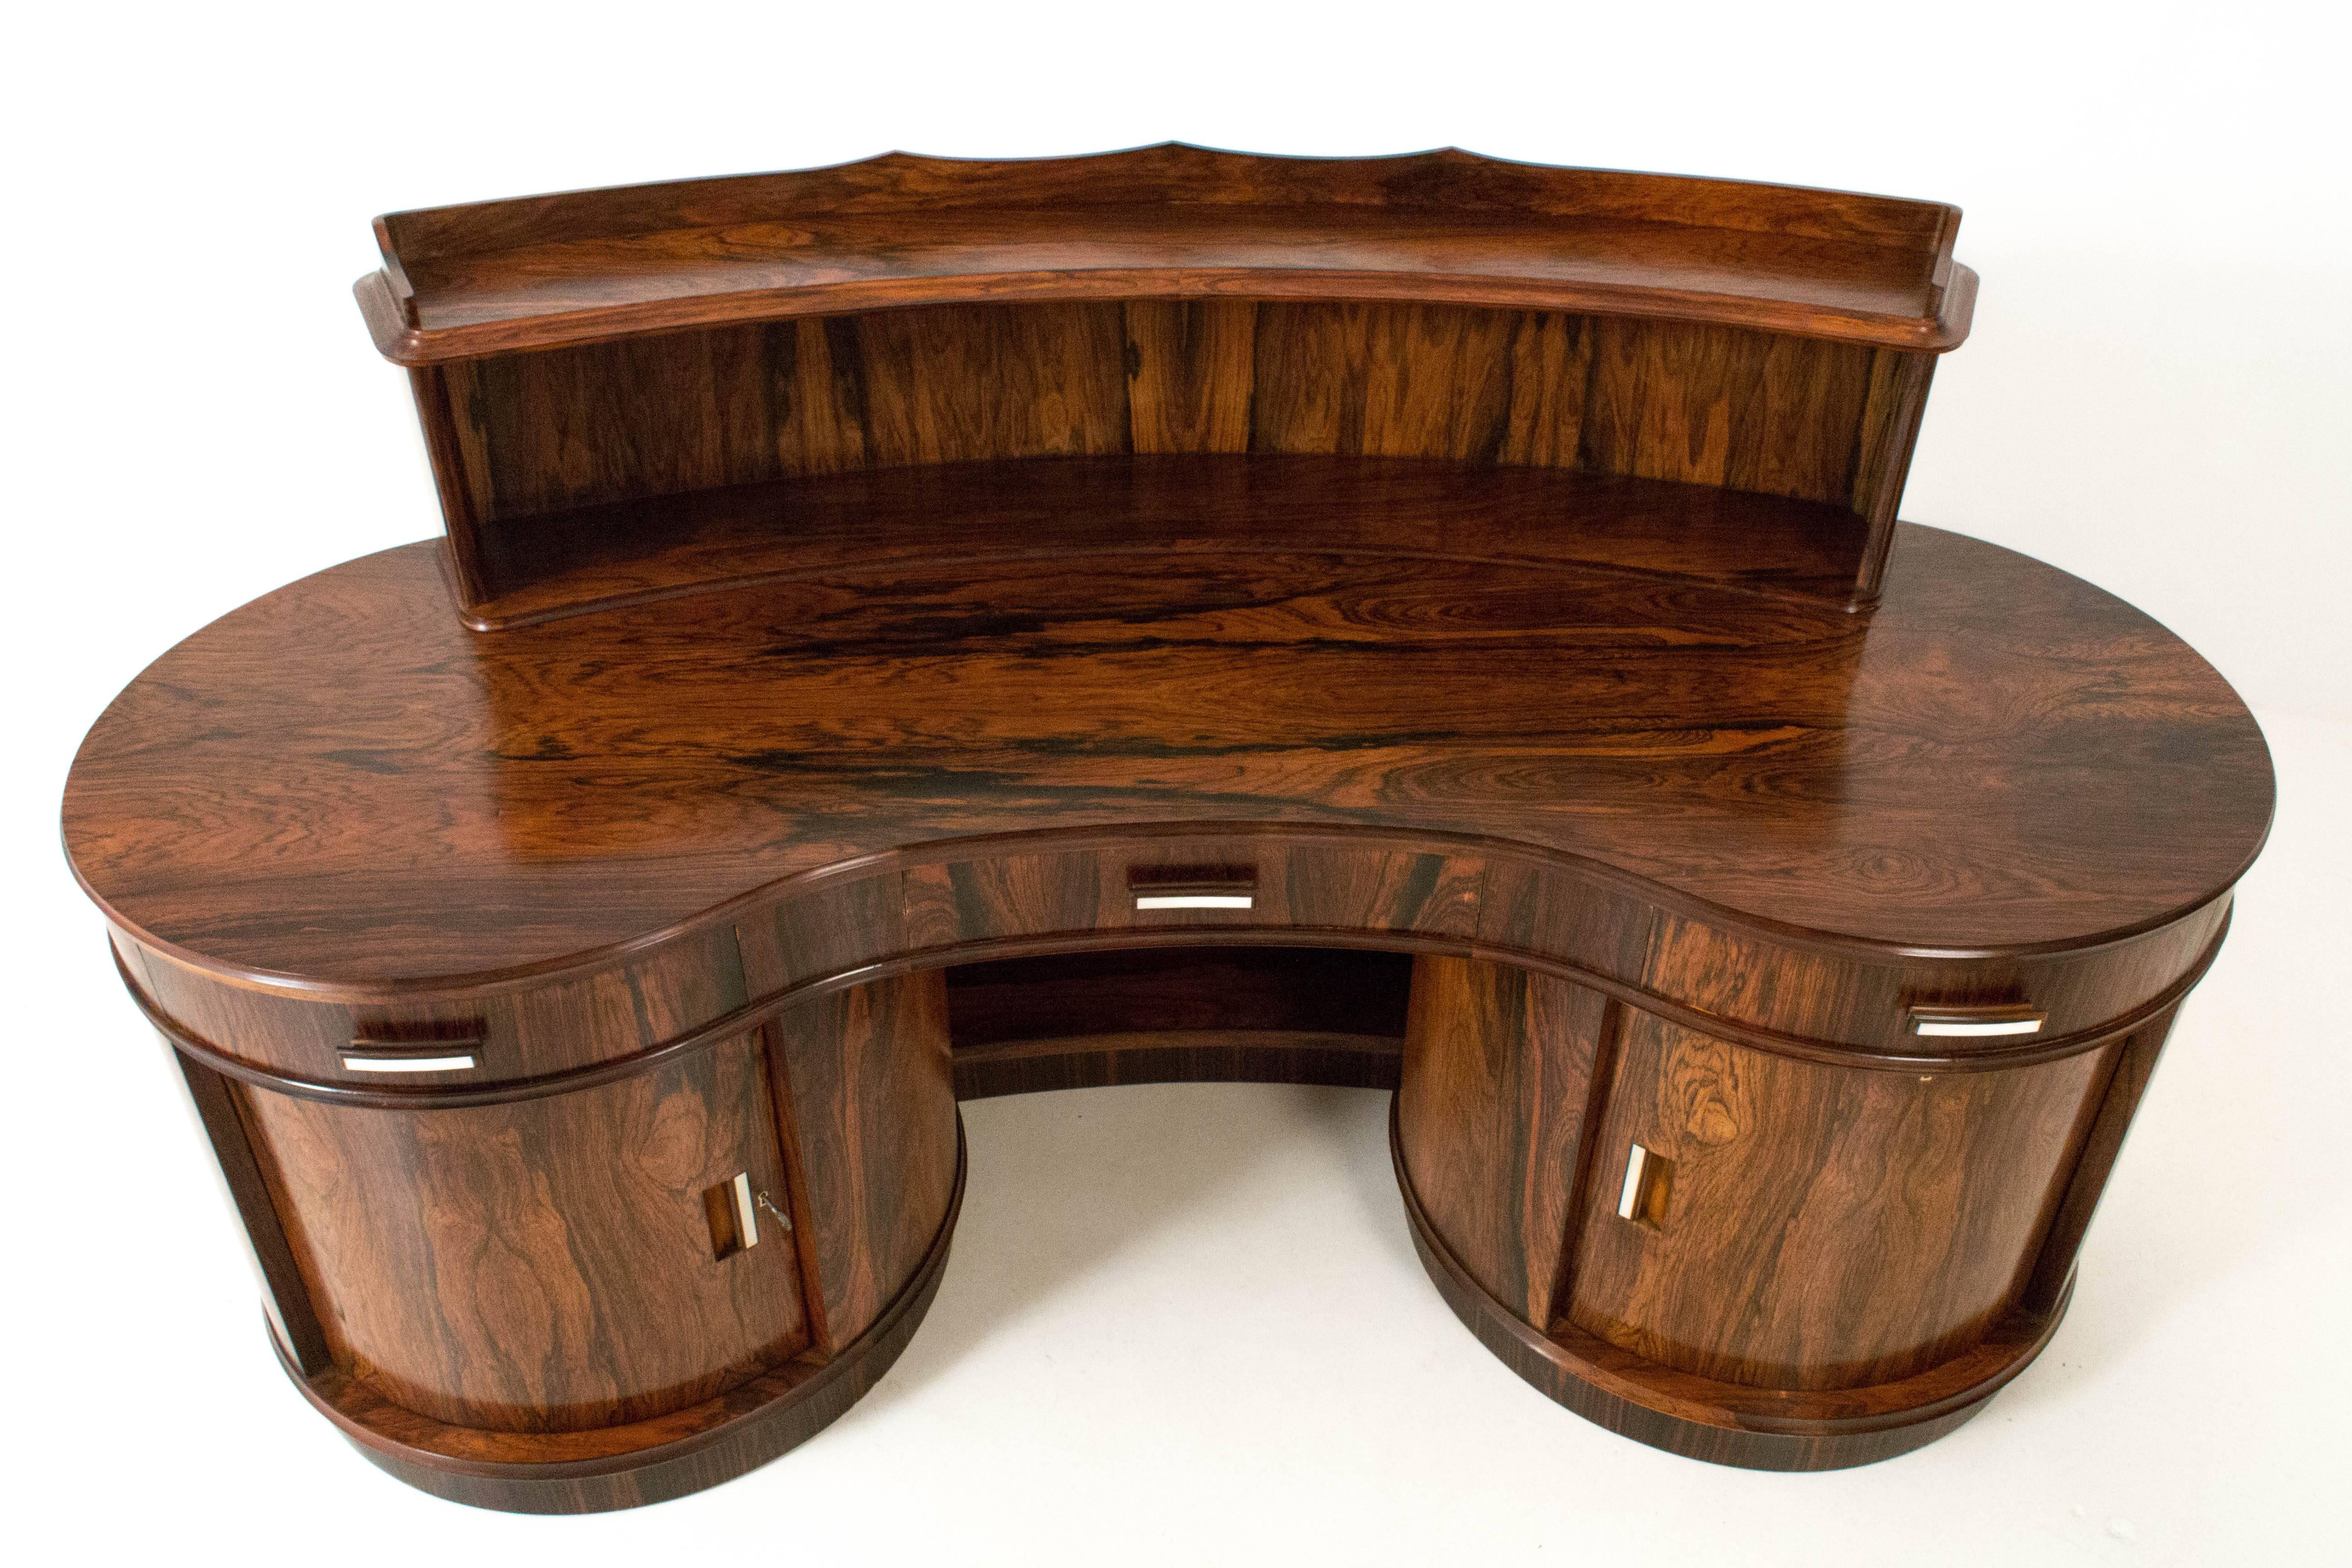 Mid-20th Century Magnificent Art Deco Kidney Shaped Desk with Armchair by Reens Amsterdam